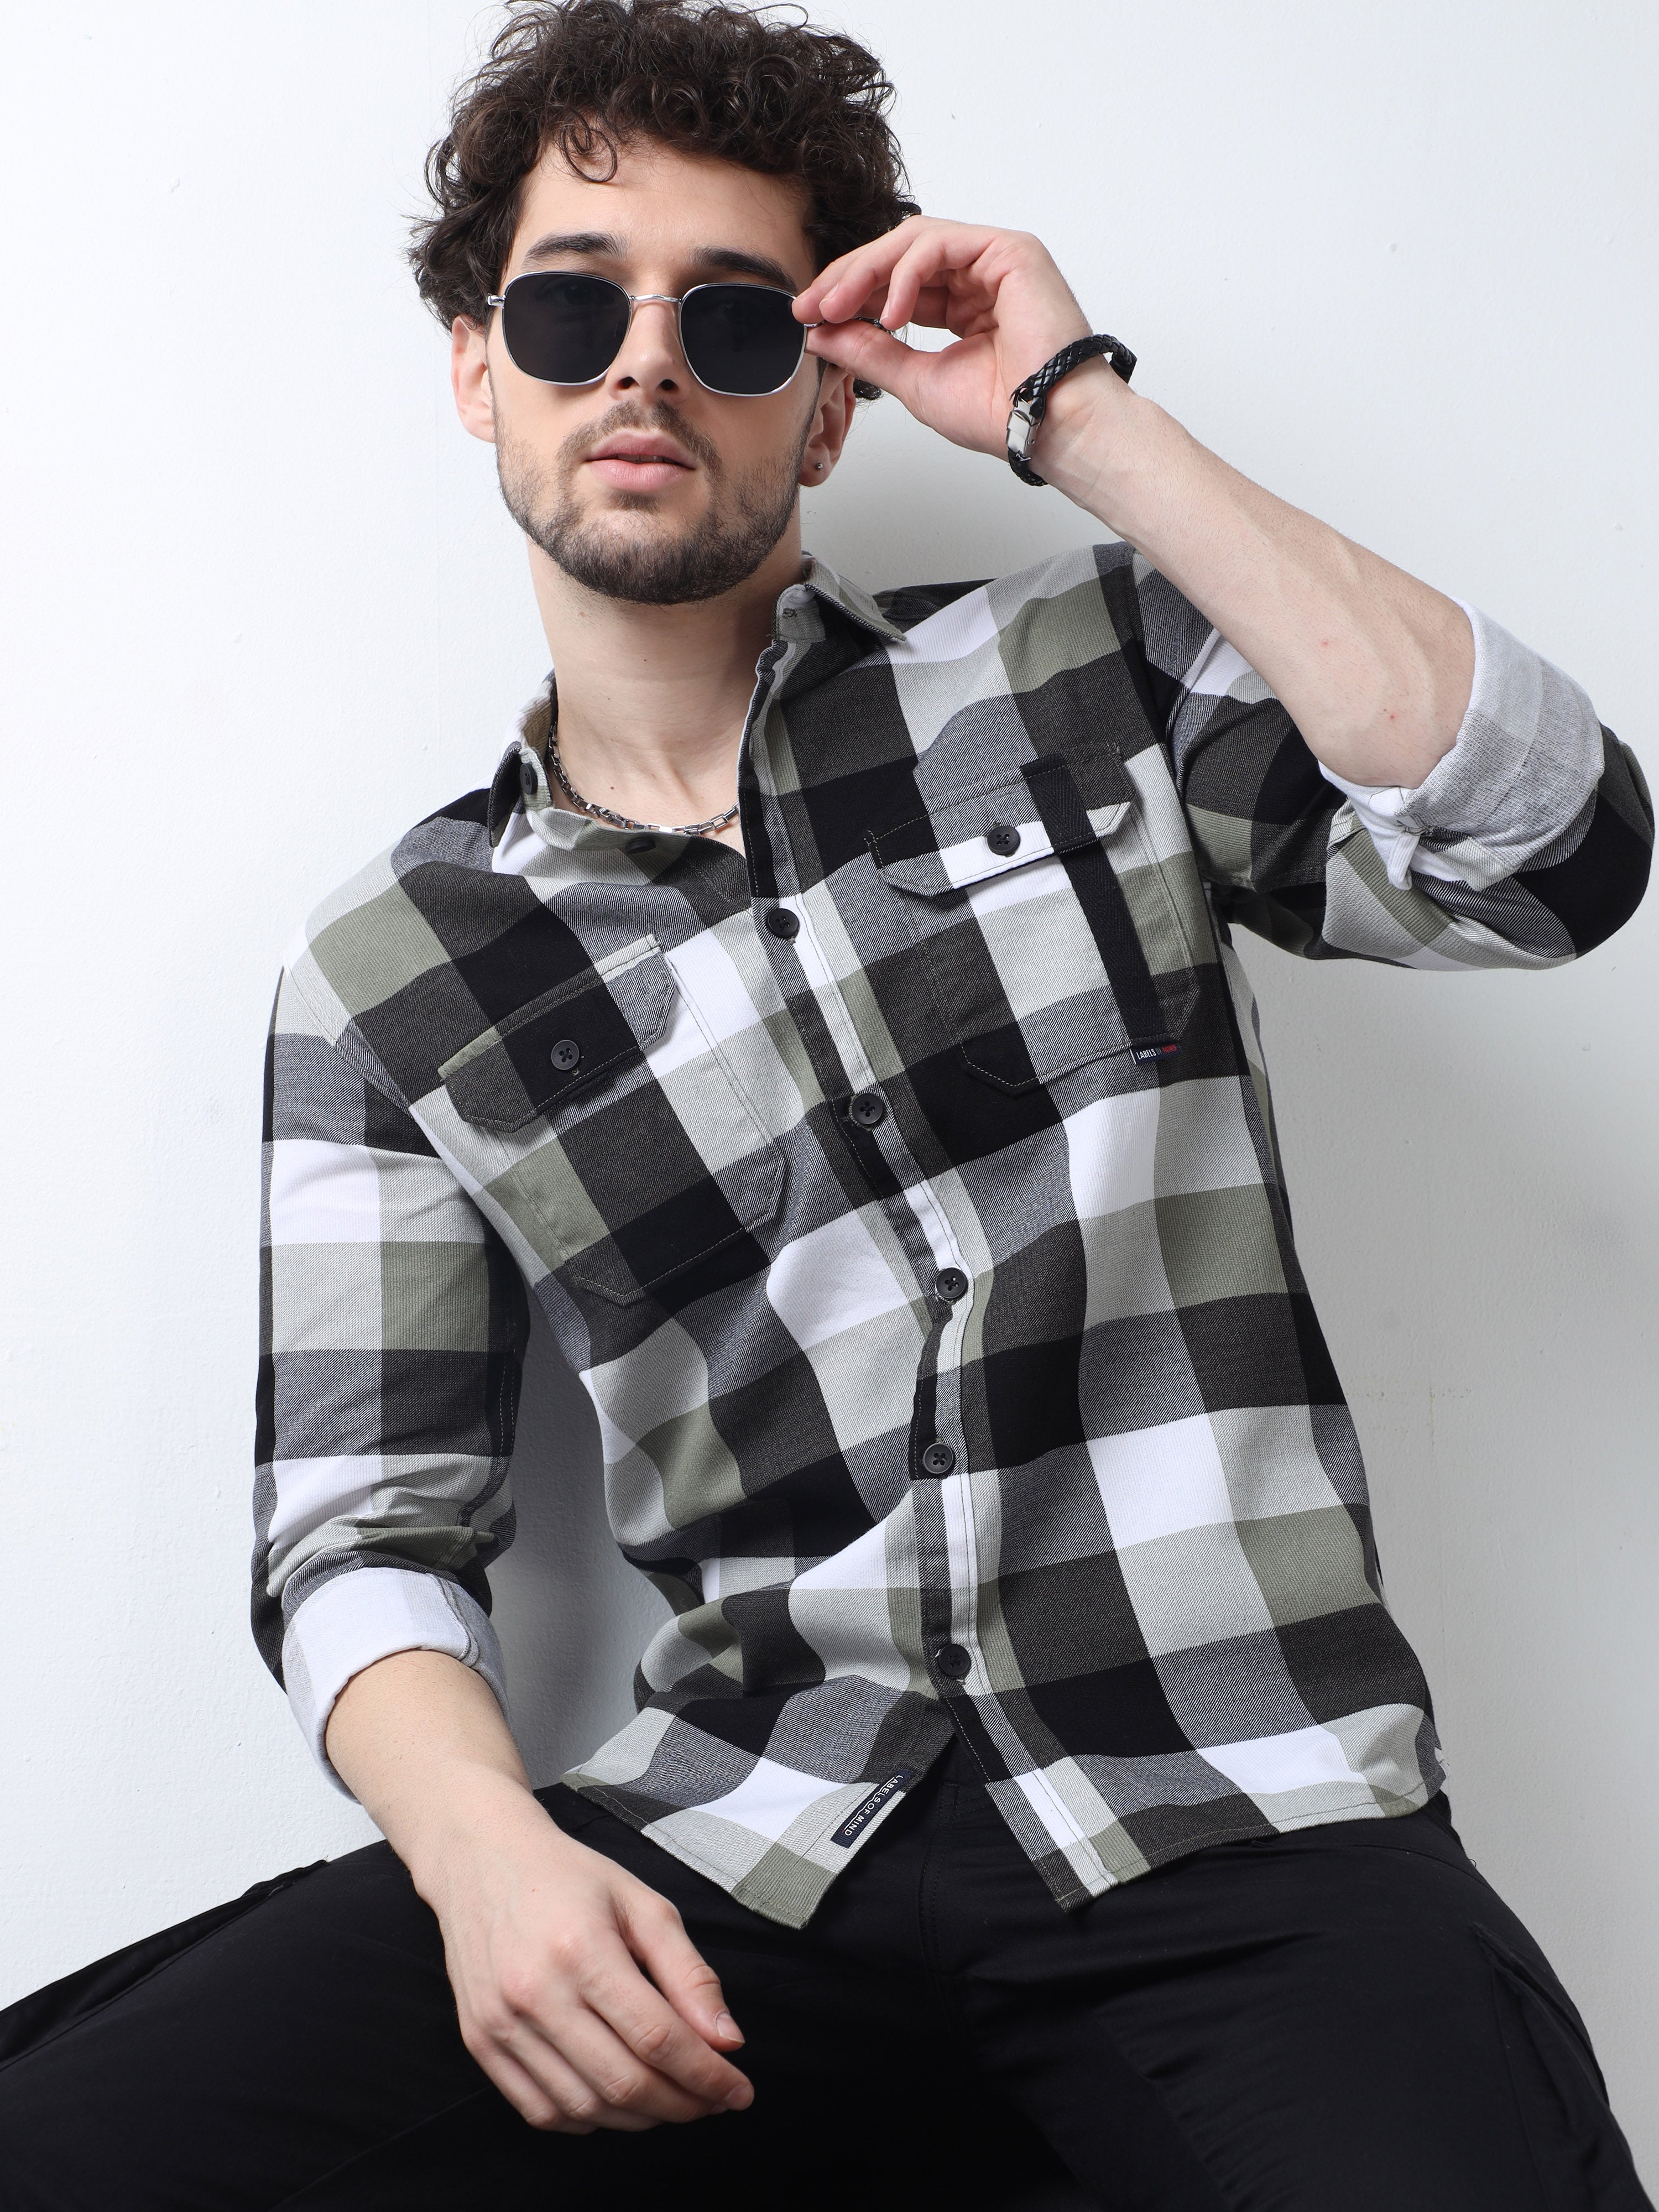 Shop Stylish olive green check shirt at Great priceRs. 1359.00